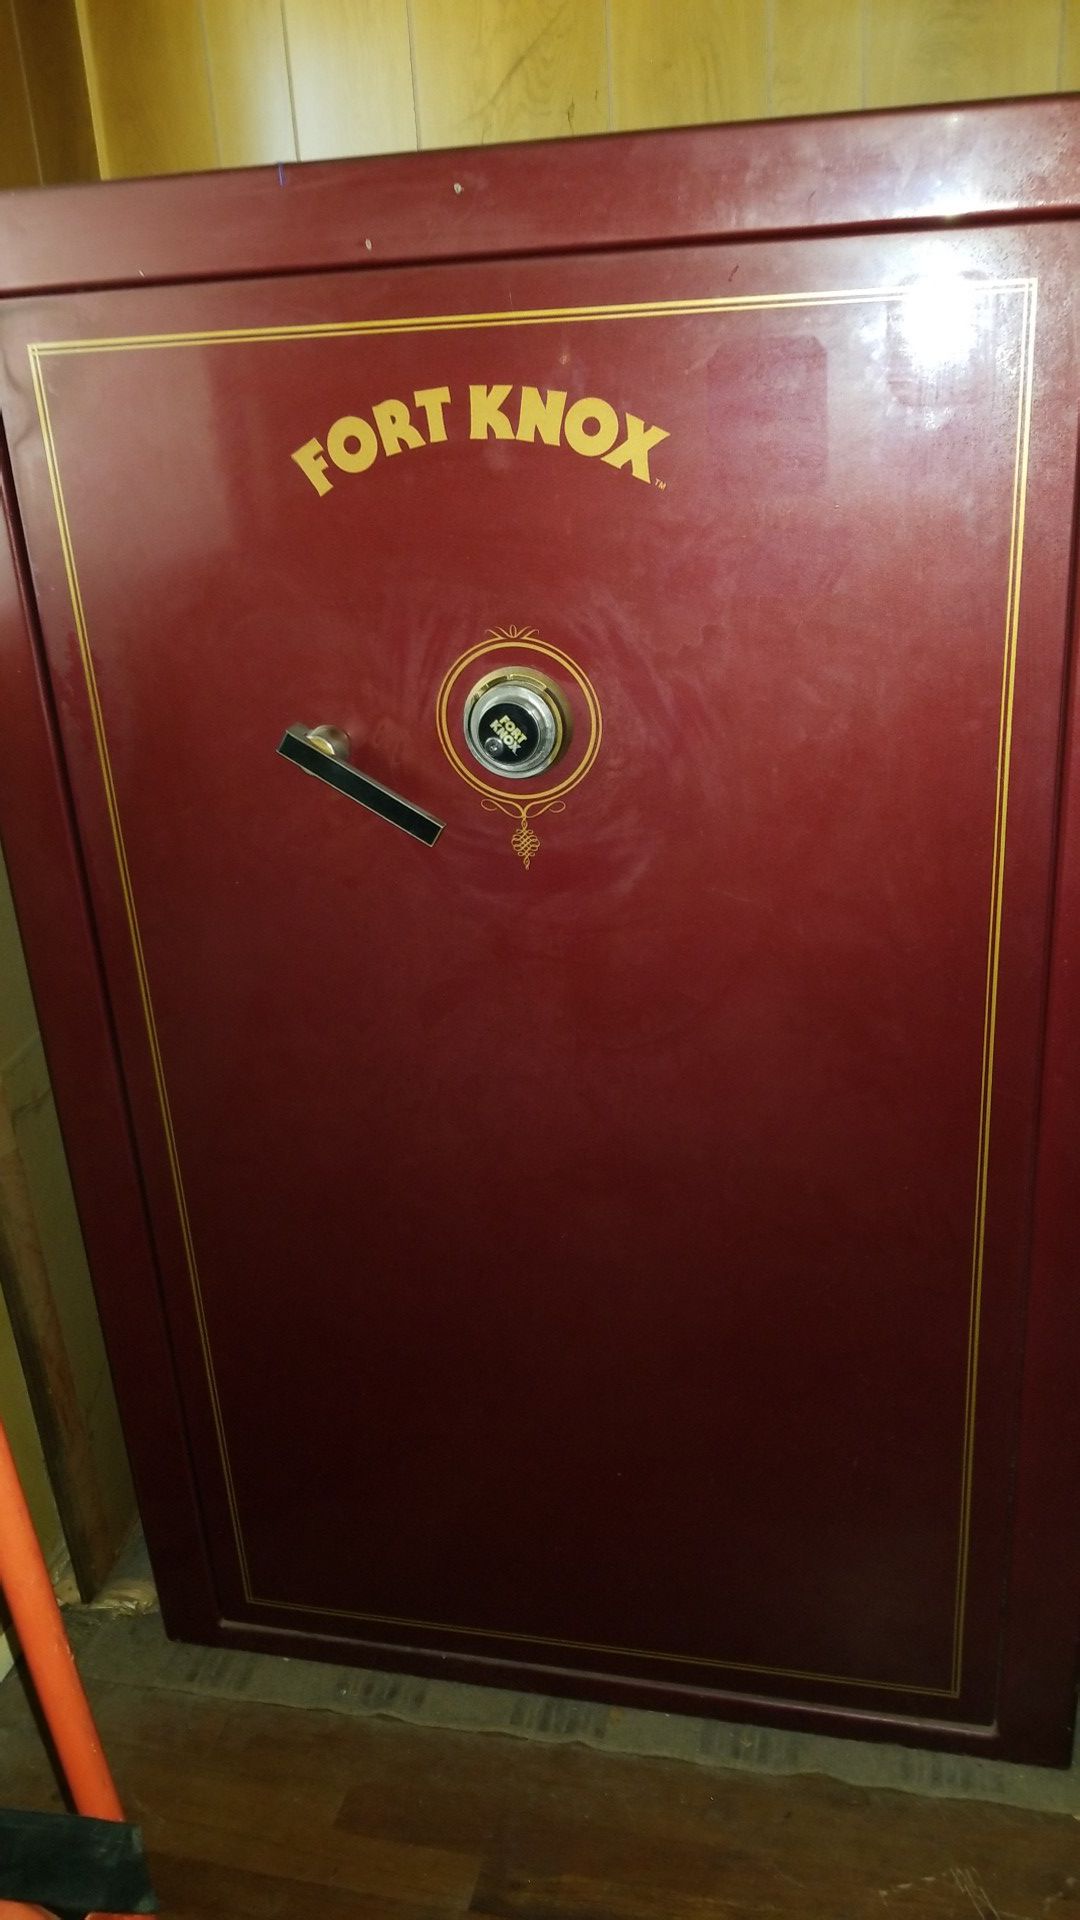 Fort Knox gun safe, used. Empty. Comes with combination and key to locking dial.